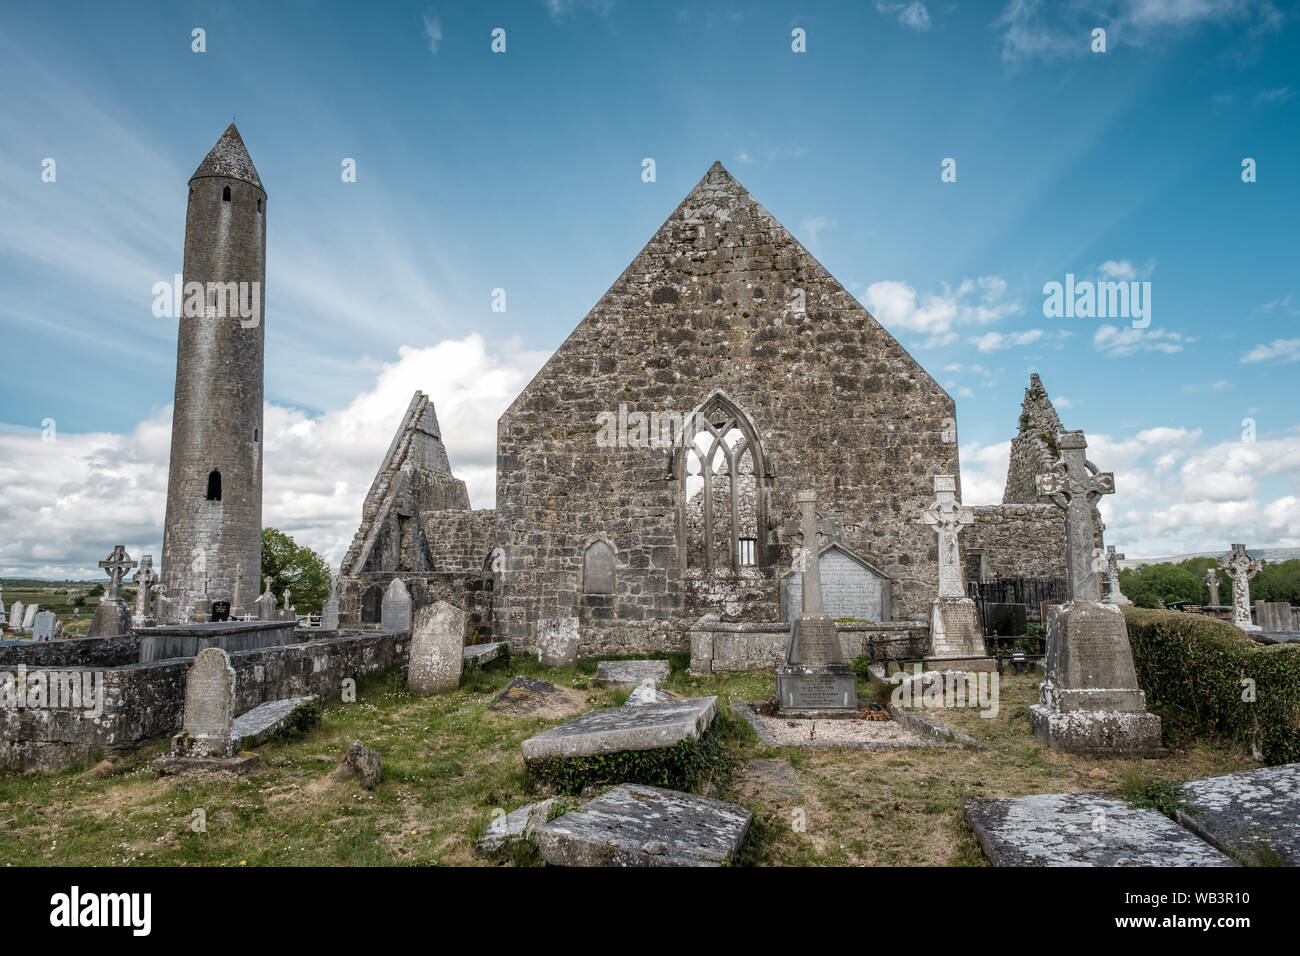 Kilmacduagh Monastery, Nr Gort, County Galway, Ireland - 20th May 2019. The Cathedral and Circular Tower built as a refuge for monks in the 12th centu Stock Photo